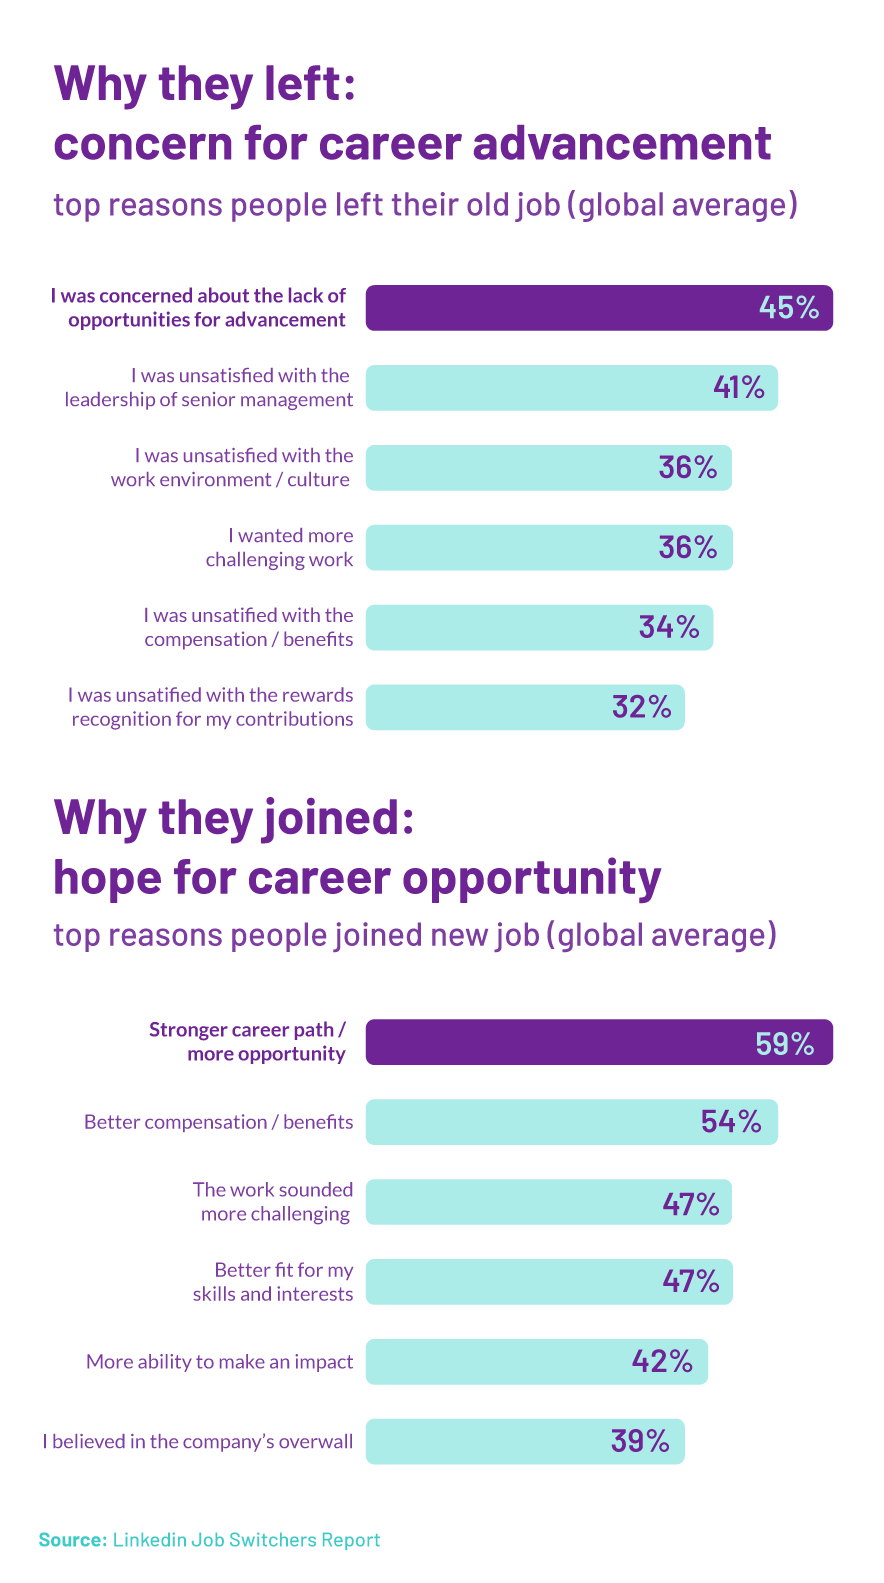 Top reasons people left their old job and joined a new one. 